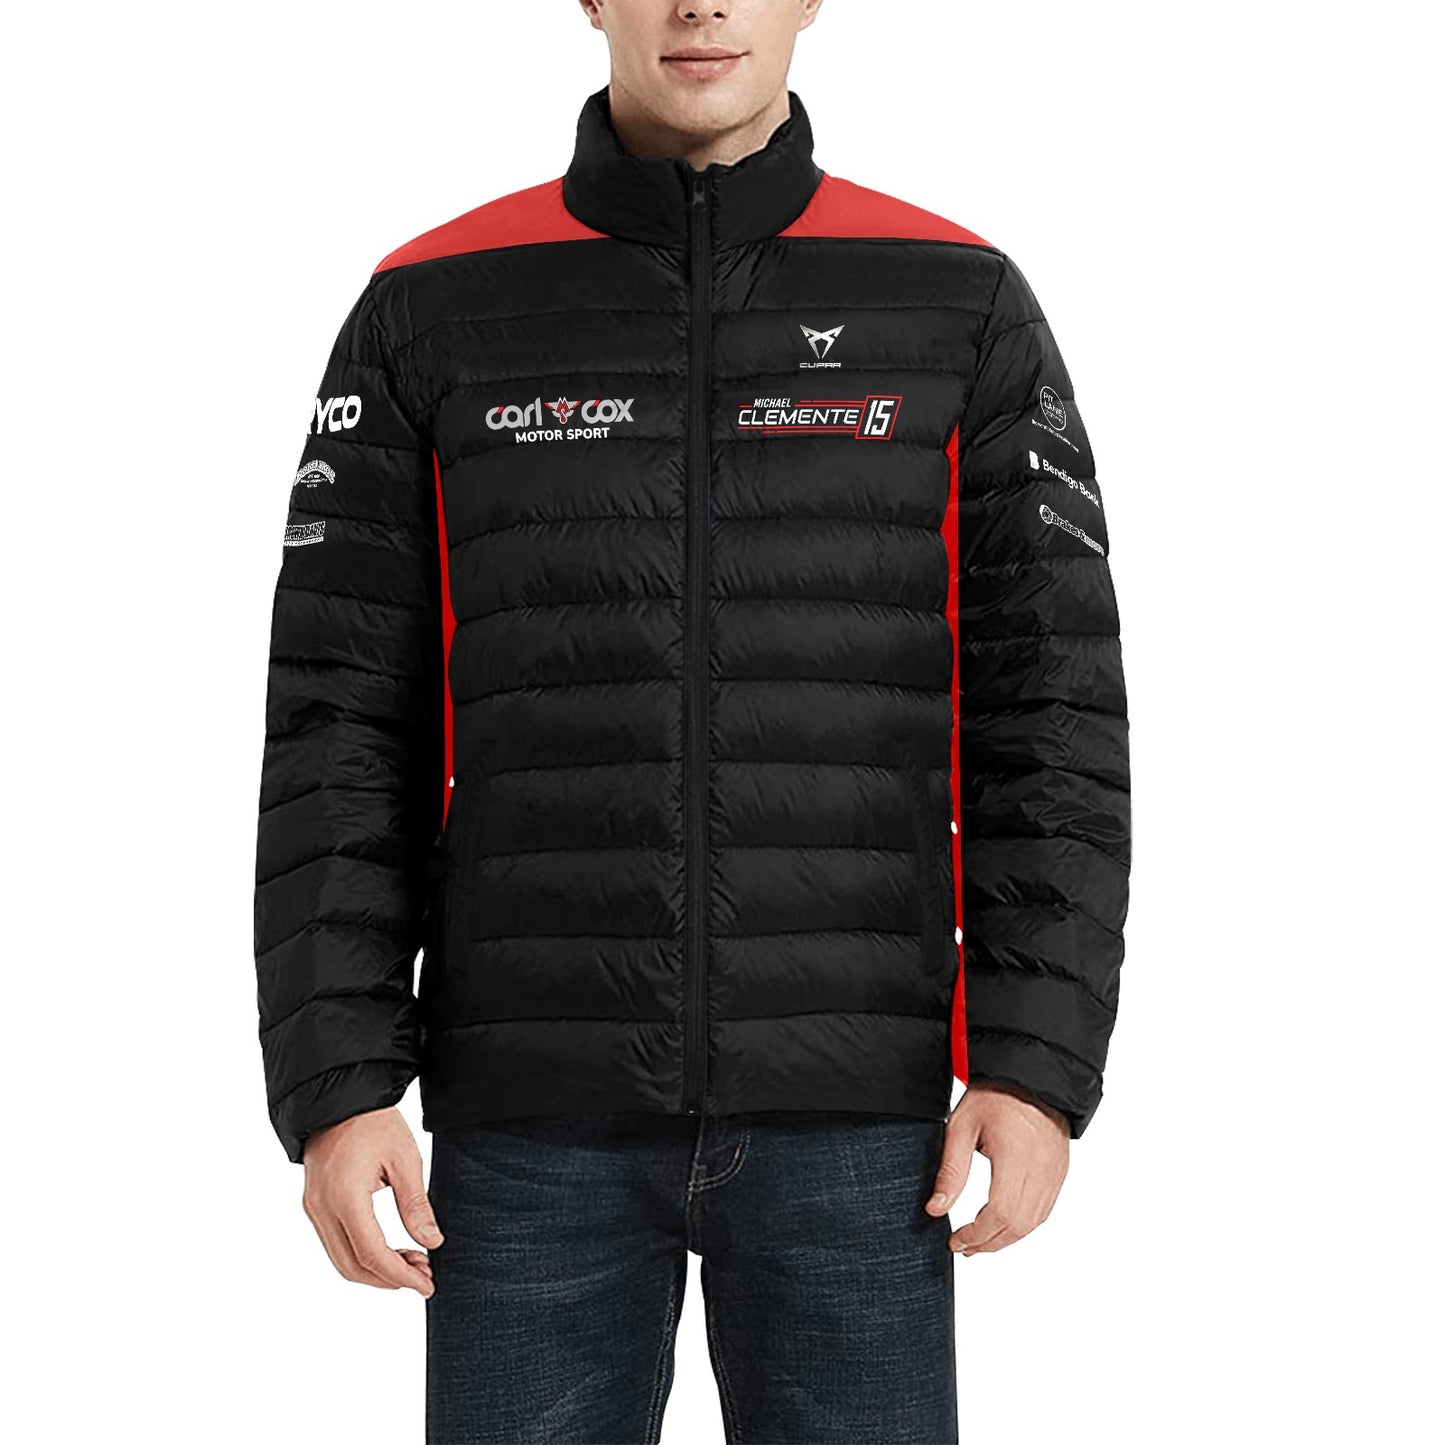 MICHAEL CLEMENTE 15 Puffer Jacket  - as worn by Race Team